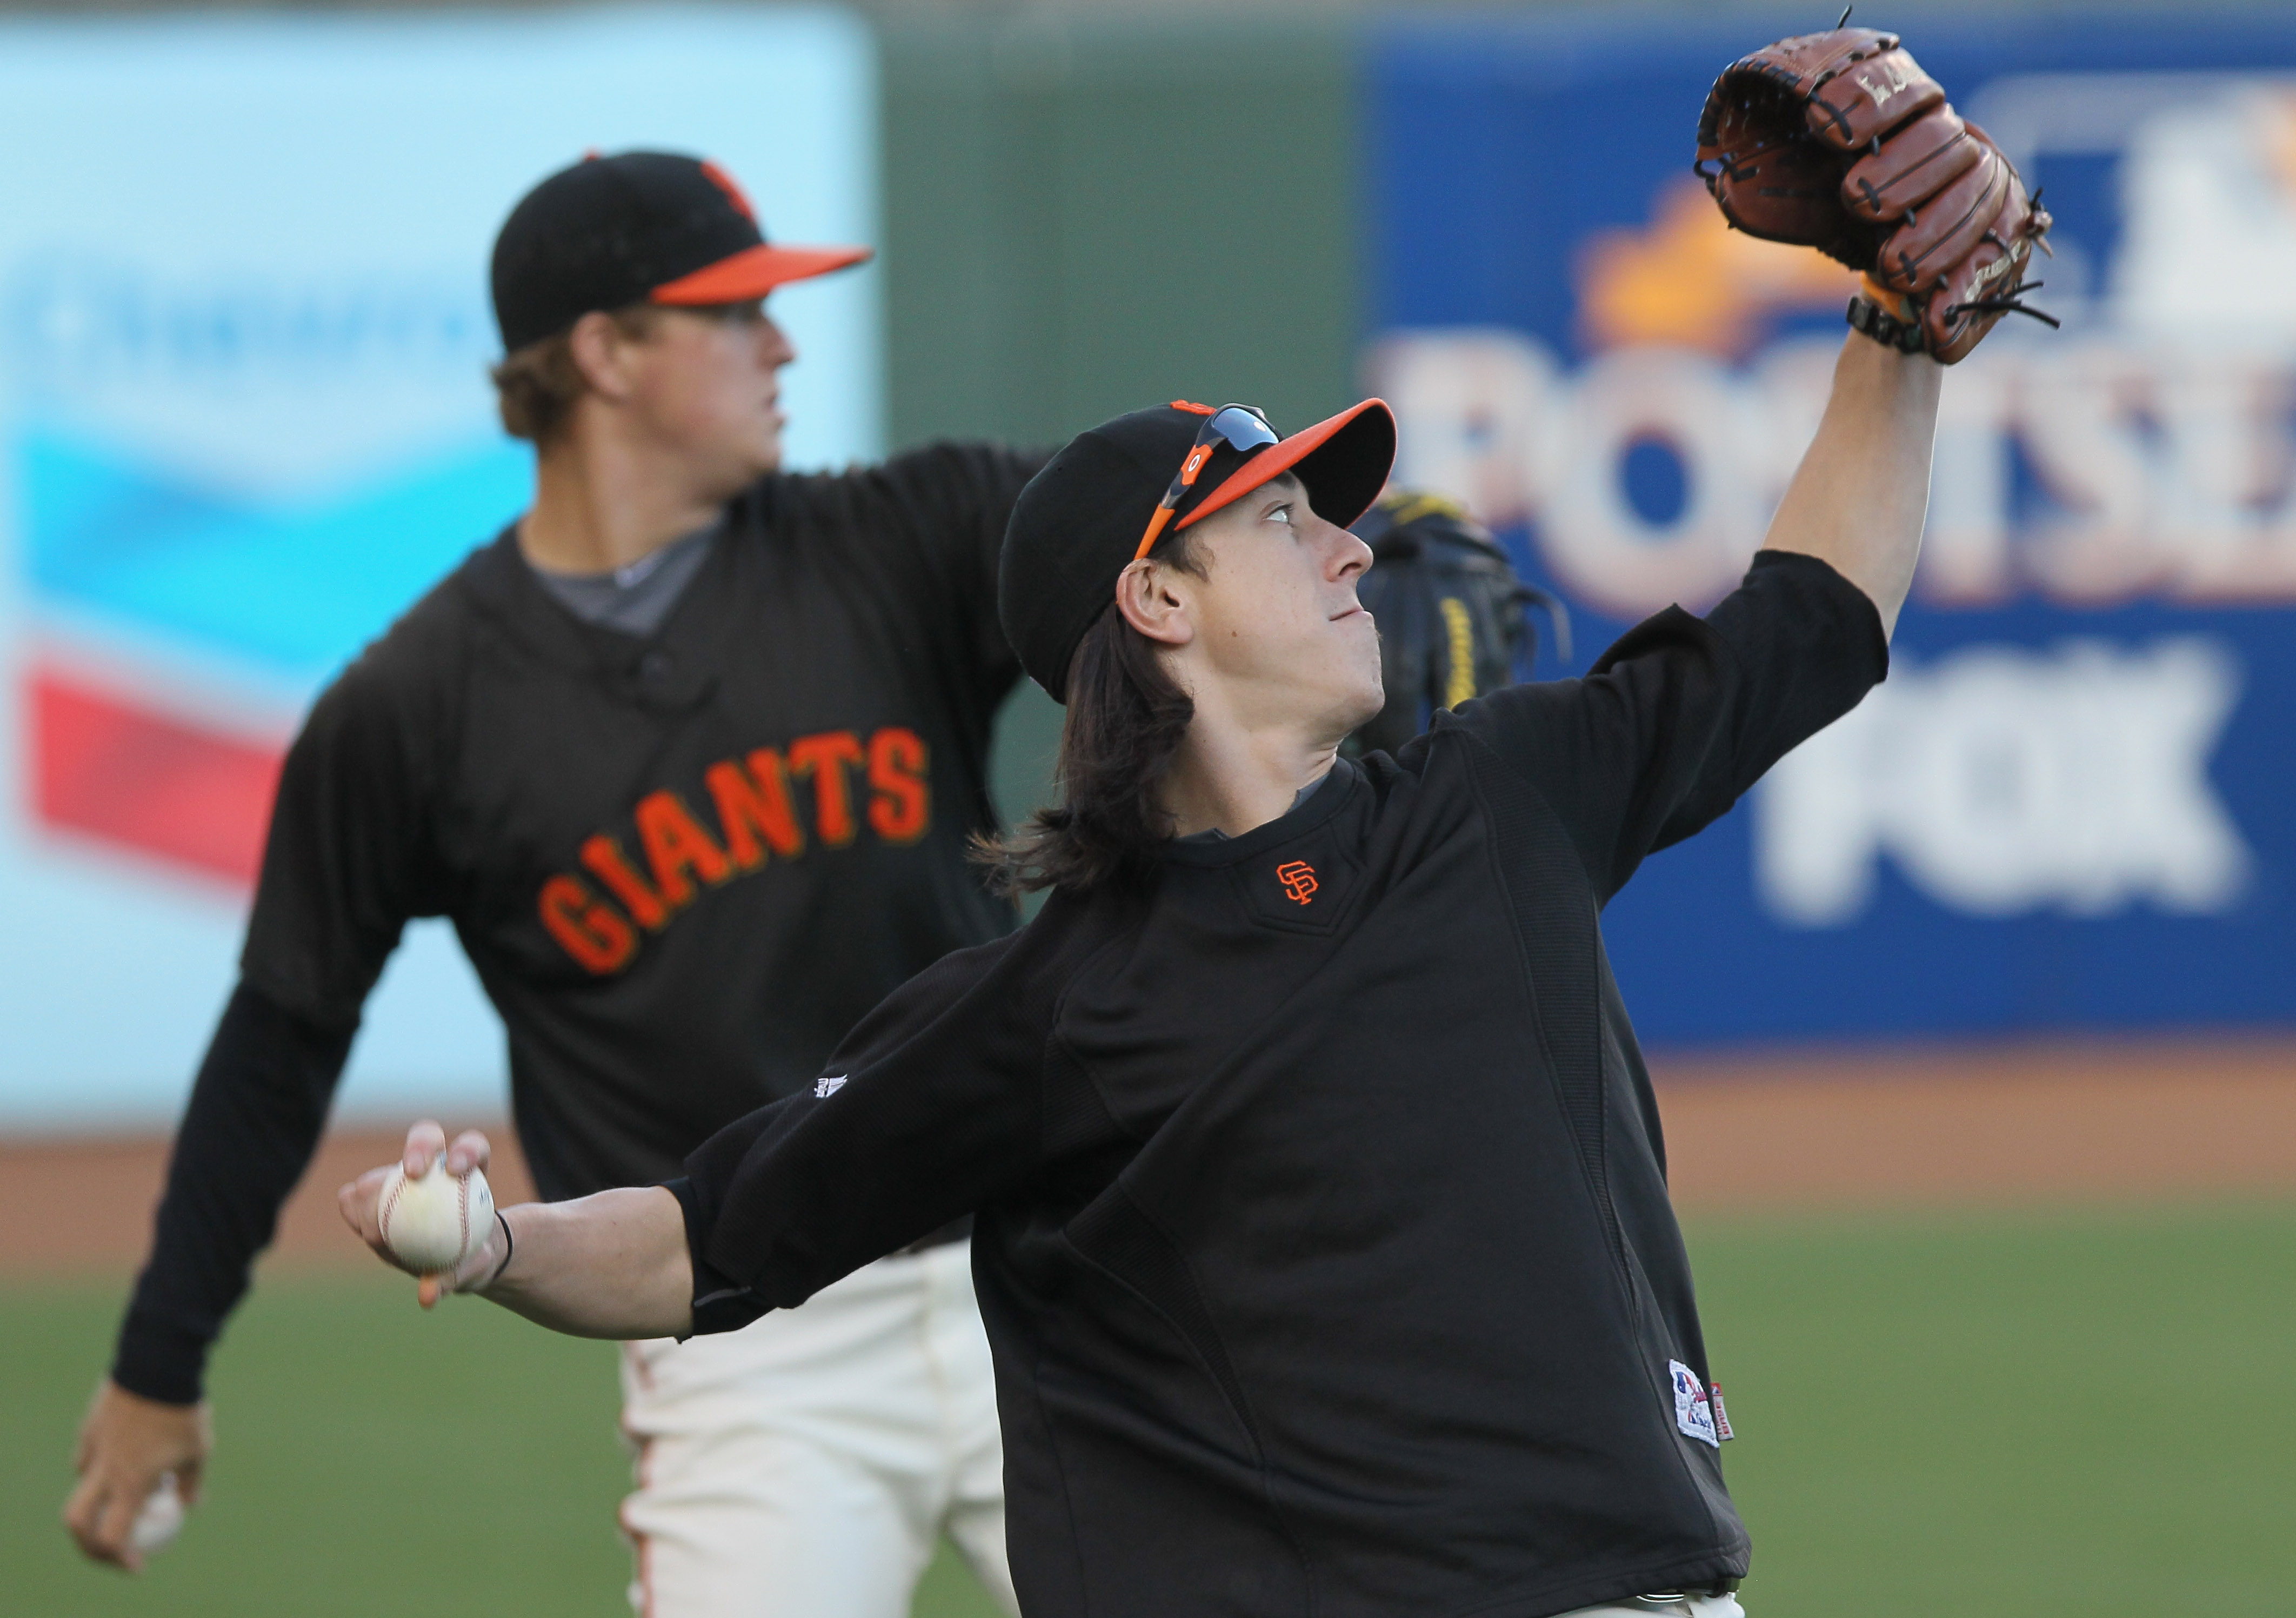 SAN FRANCISCO - OCTOBER 25:  Tim Lincecum #55 of the San Francisco Giants throws alongside teammate Matt Cain #18 during a team workout at AT&T Park on October 25, 2010 in San Francisco, California. The Giants are preparing to face the Texas Rangers in th